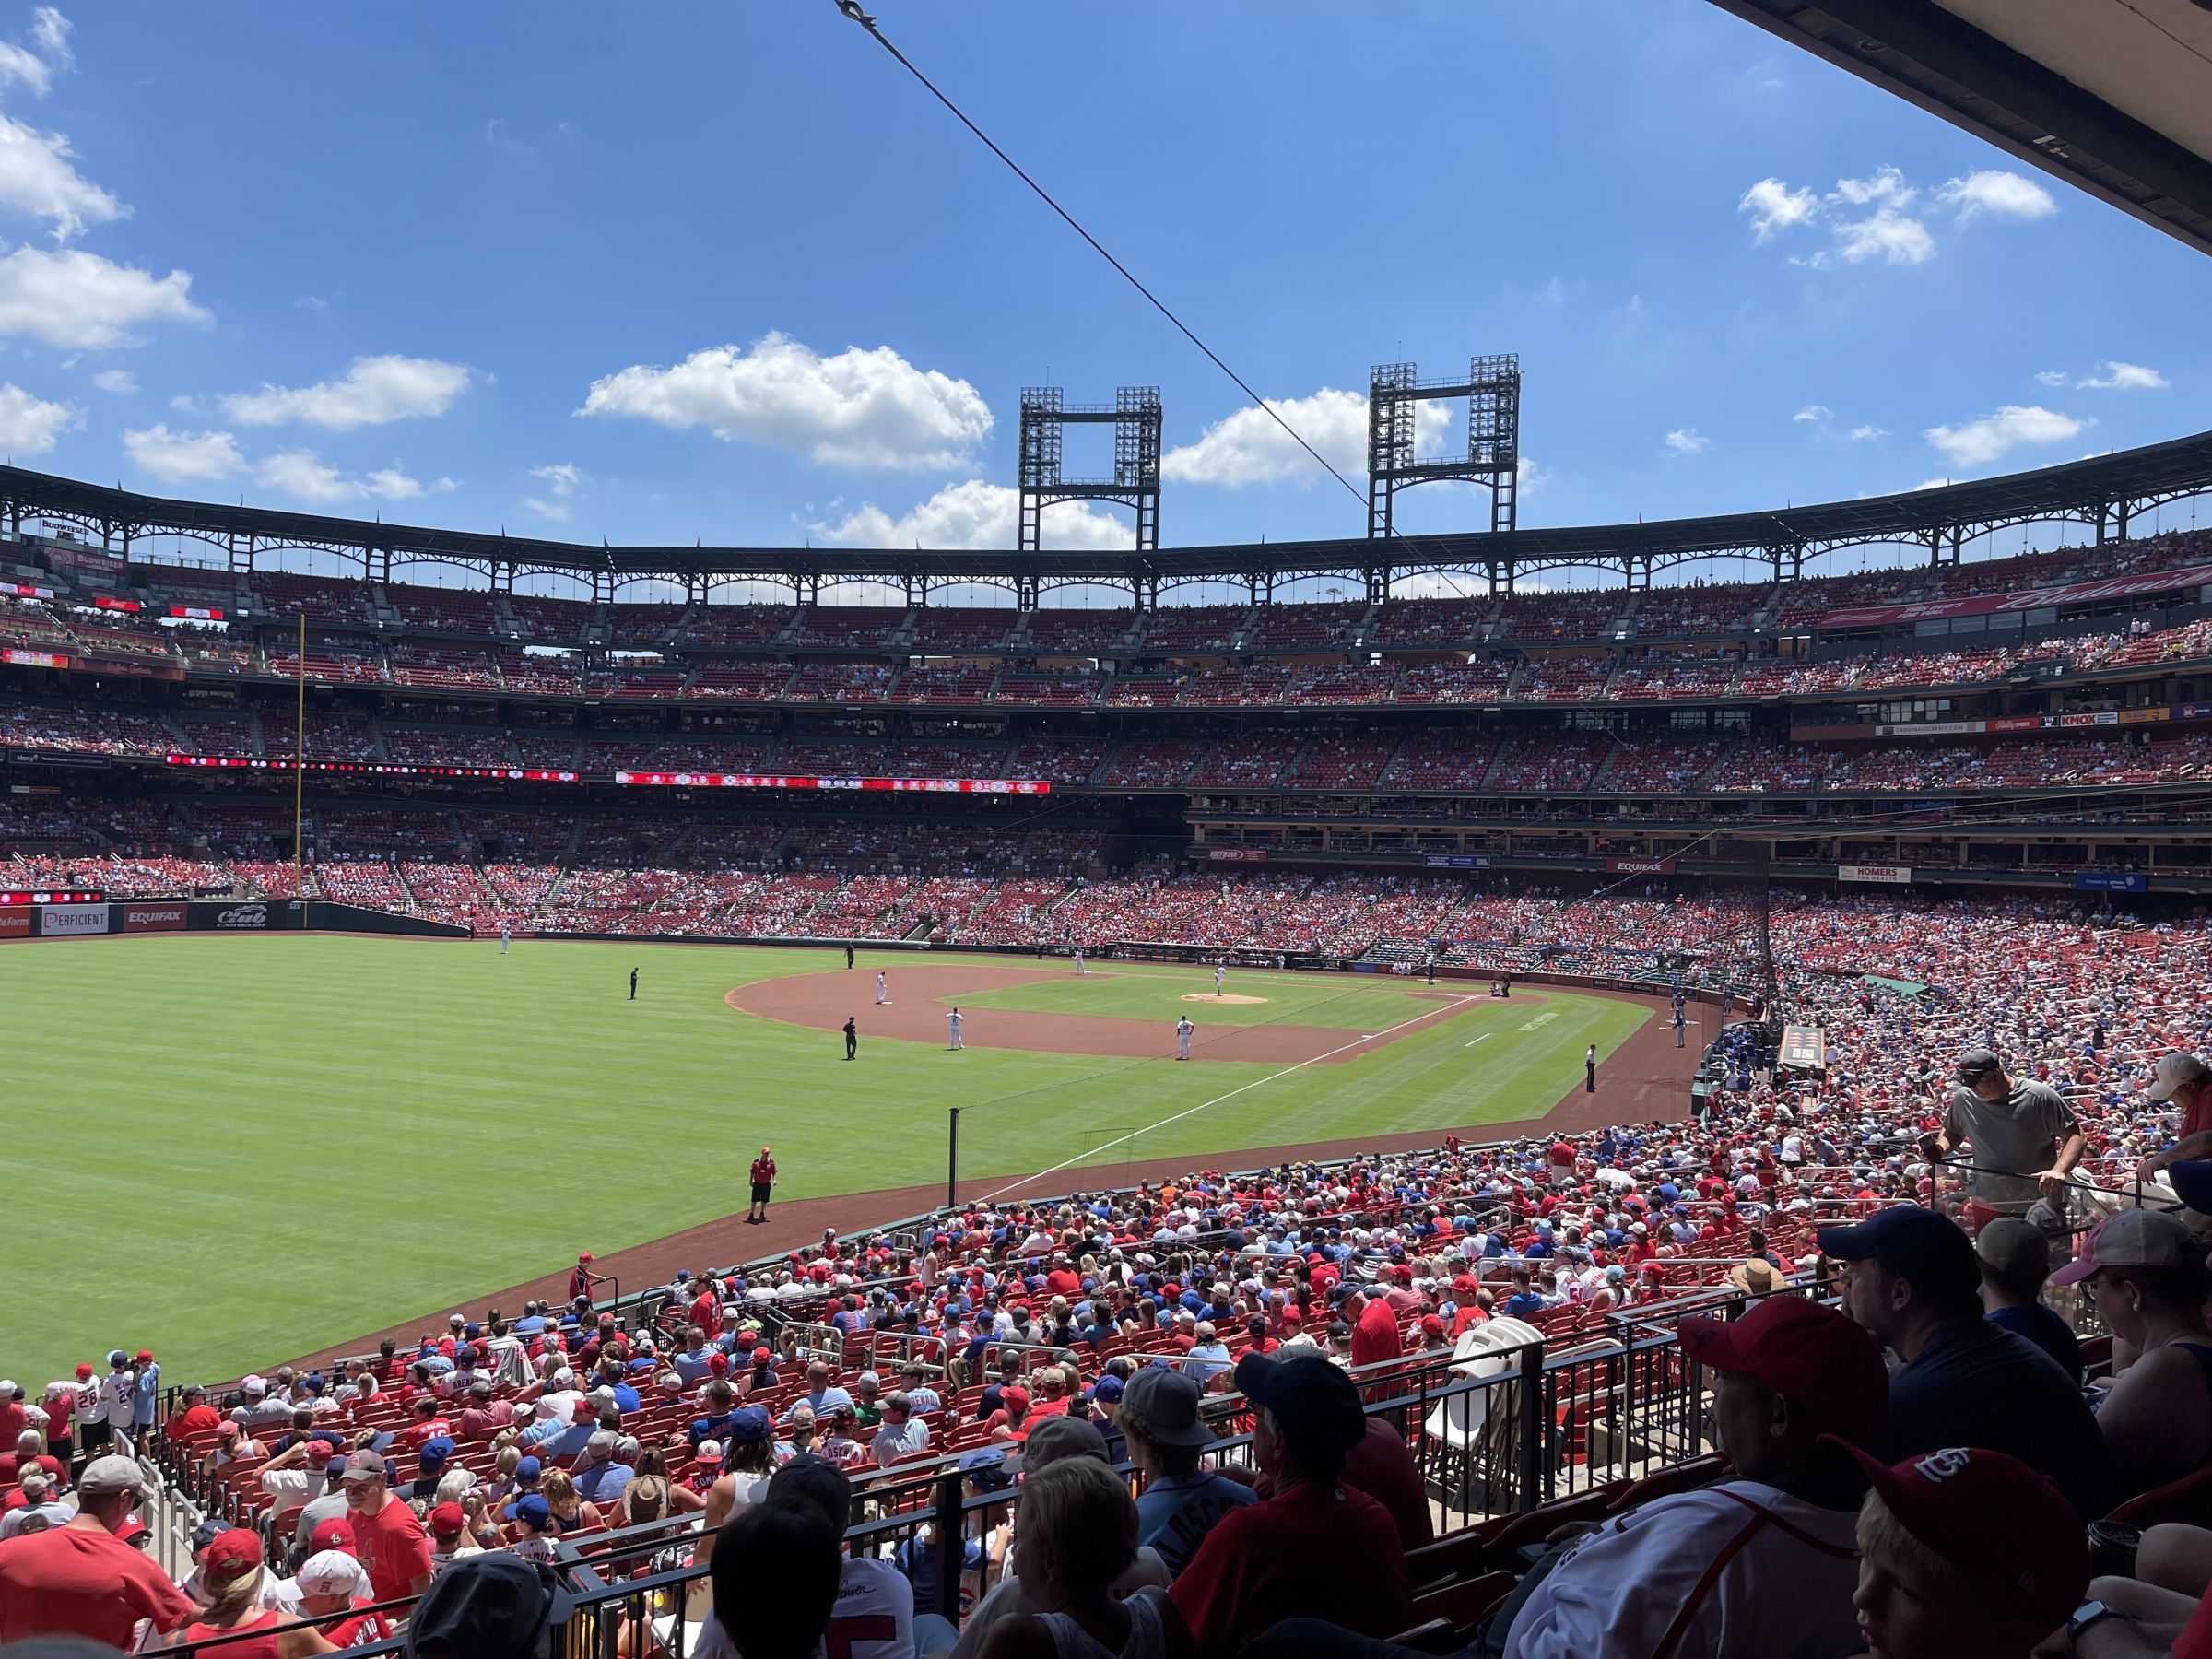 section 167, row 24 seat view  - busch stadium